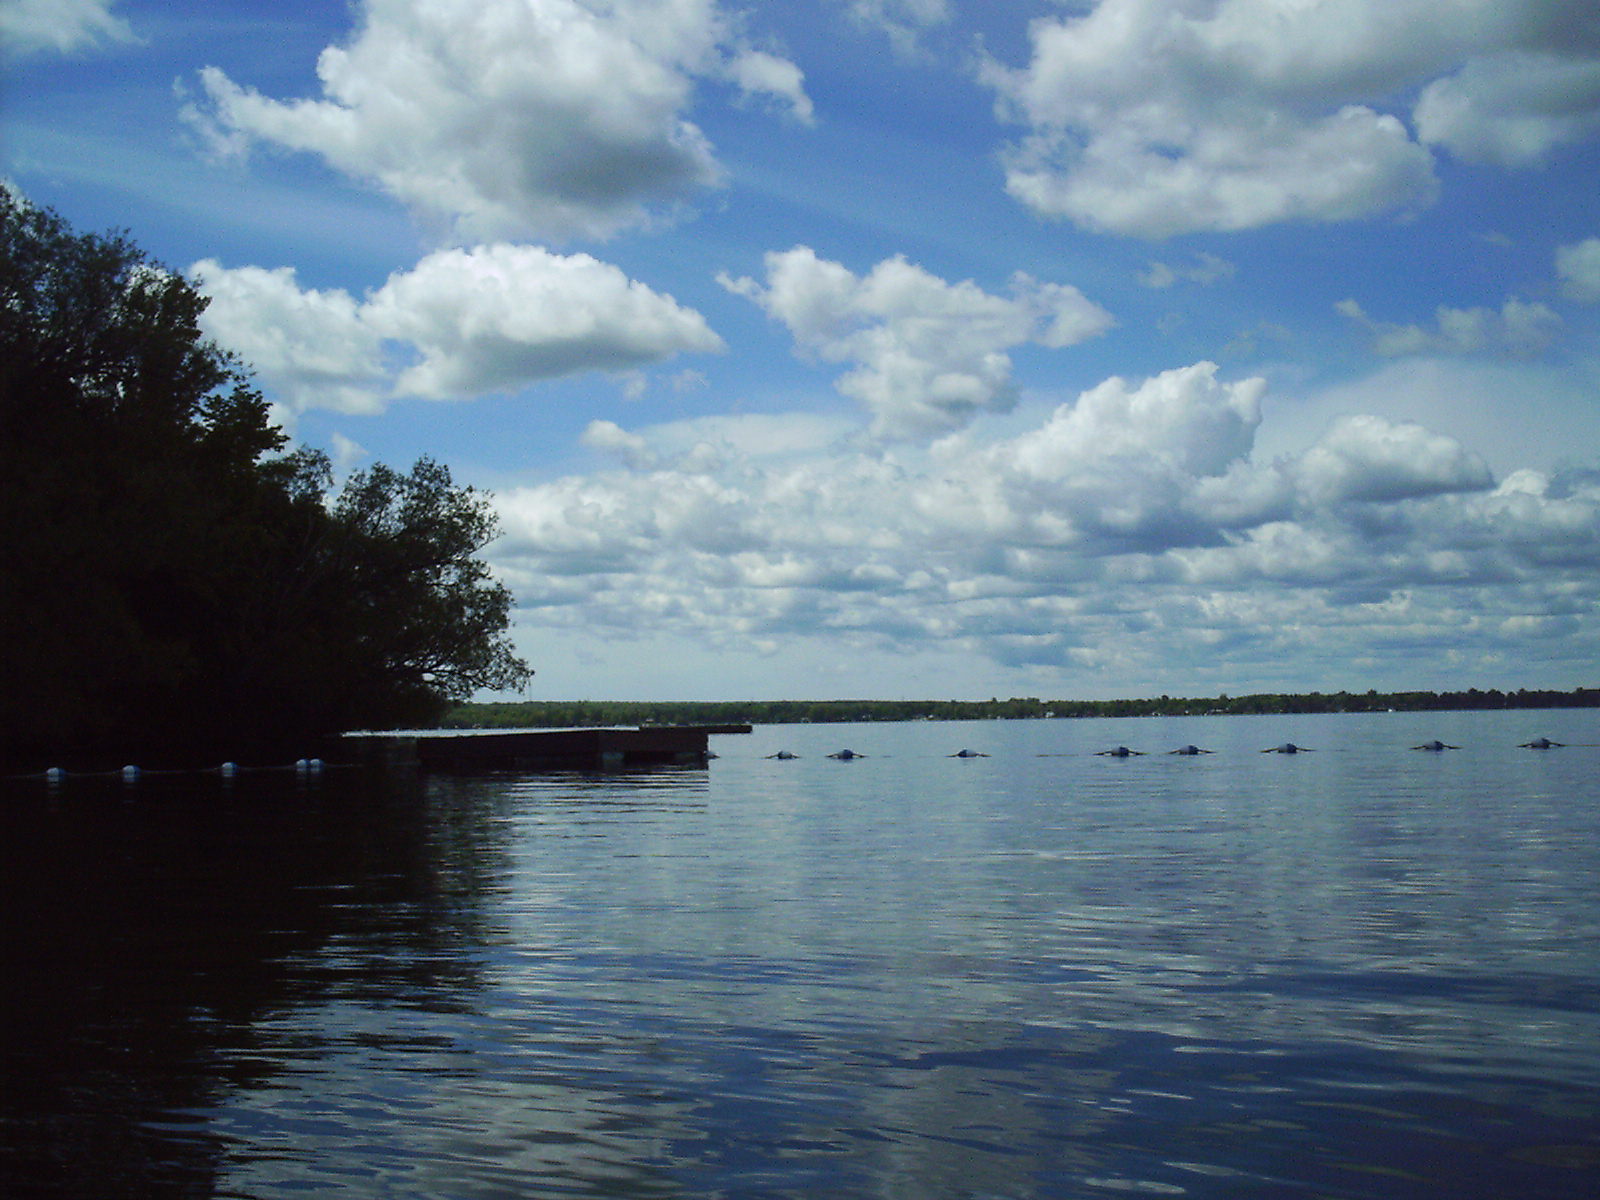 several boats floating on water surrounded by trees